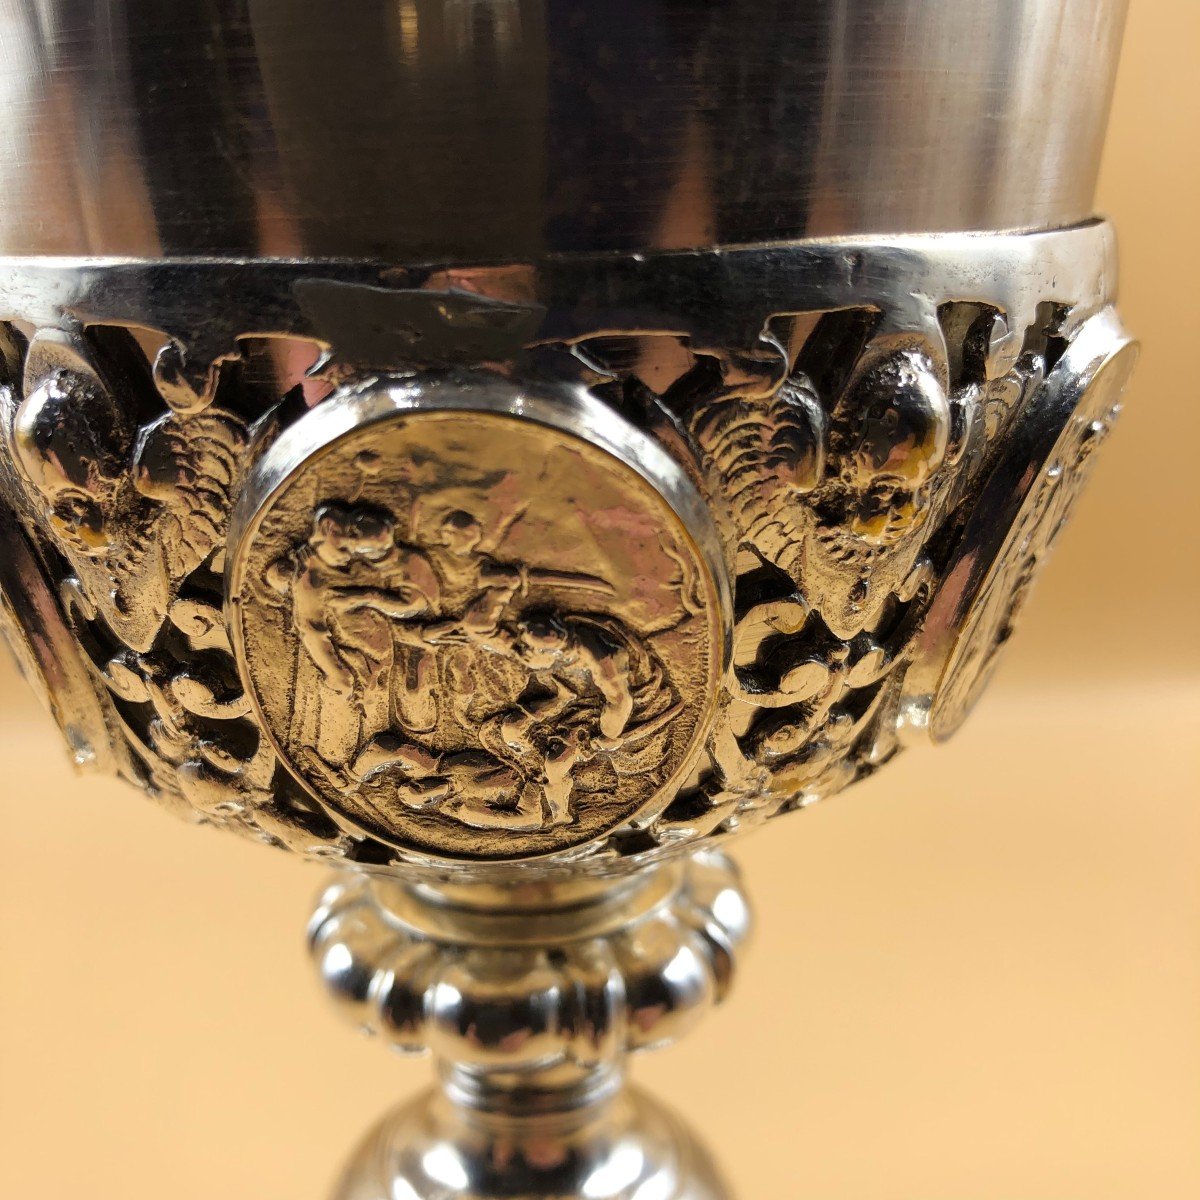 Solid Silver Florentine Goblet (hallmarked) From The Second Half Of The 18th Century.-photo-1